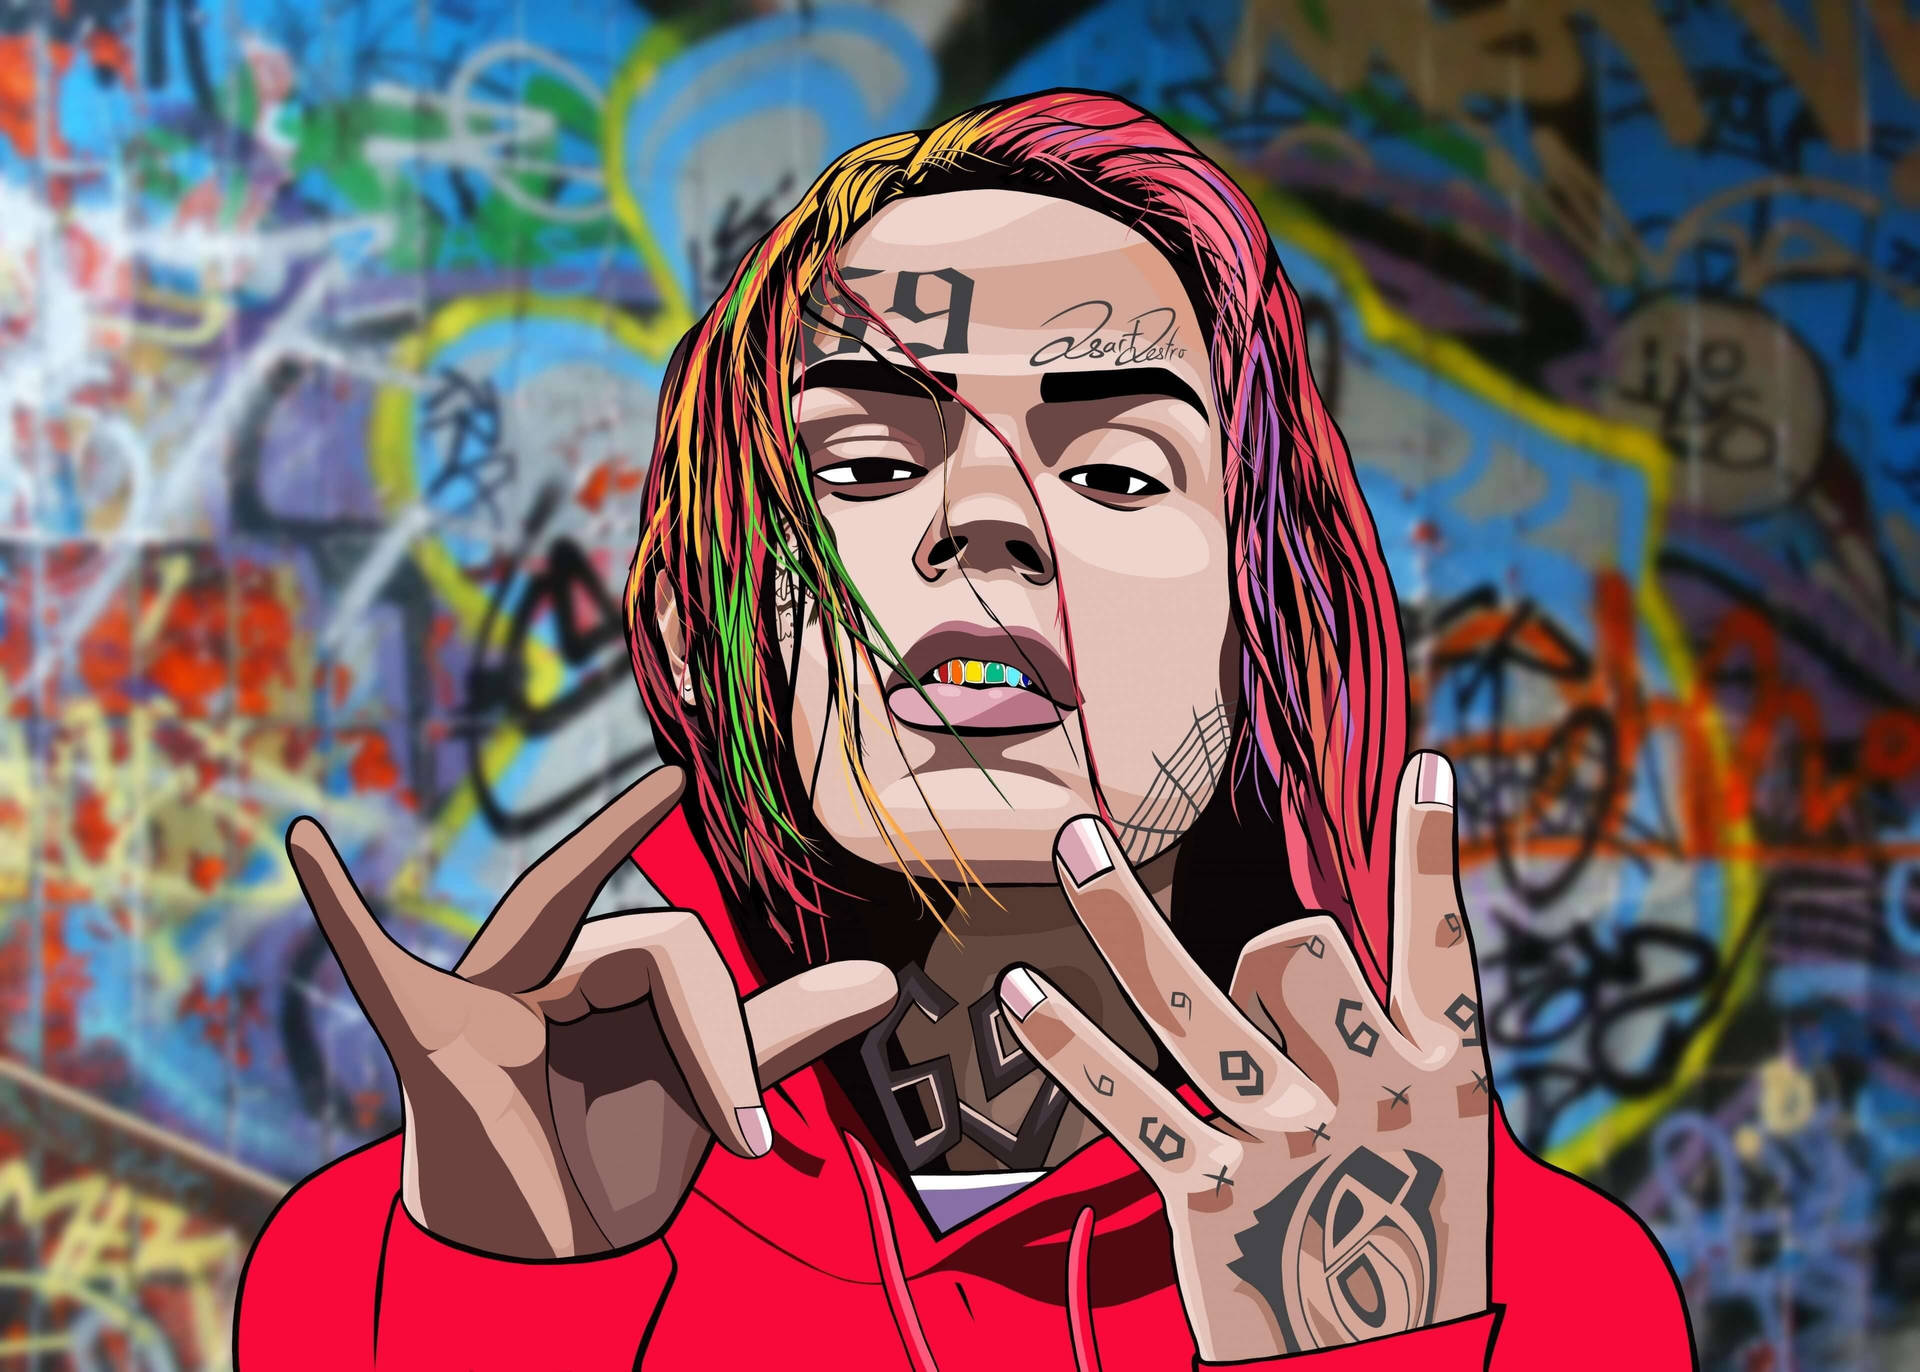 6ix9ine Tattoos And Colorful Hair Wallpaper